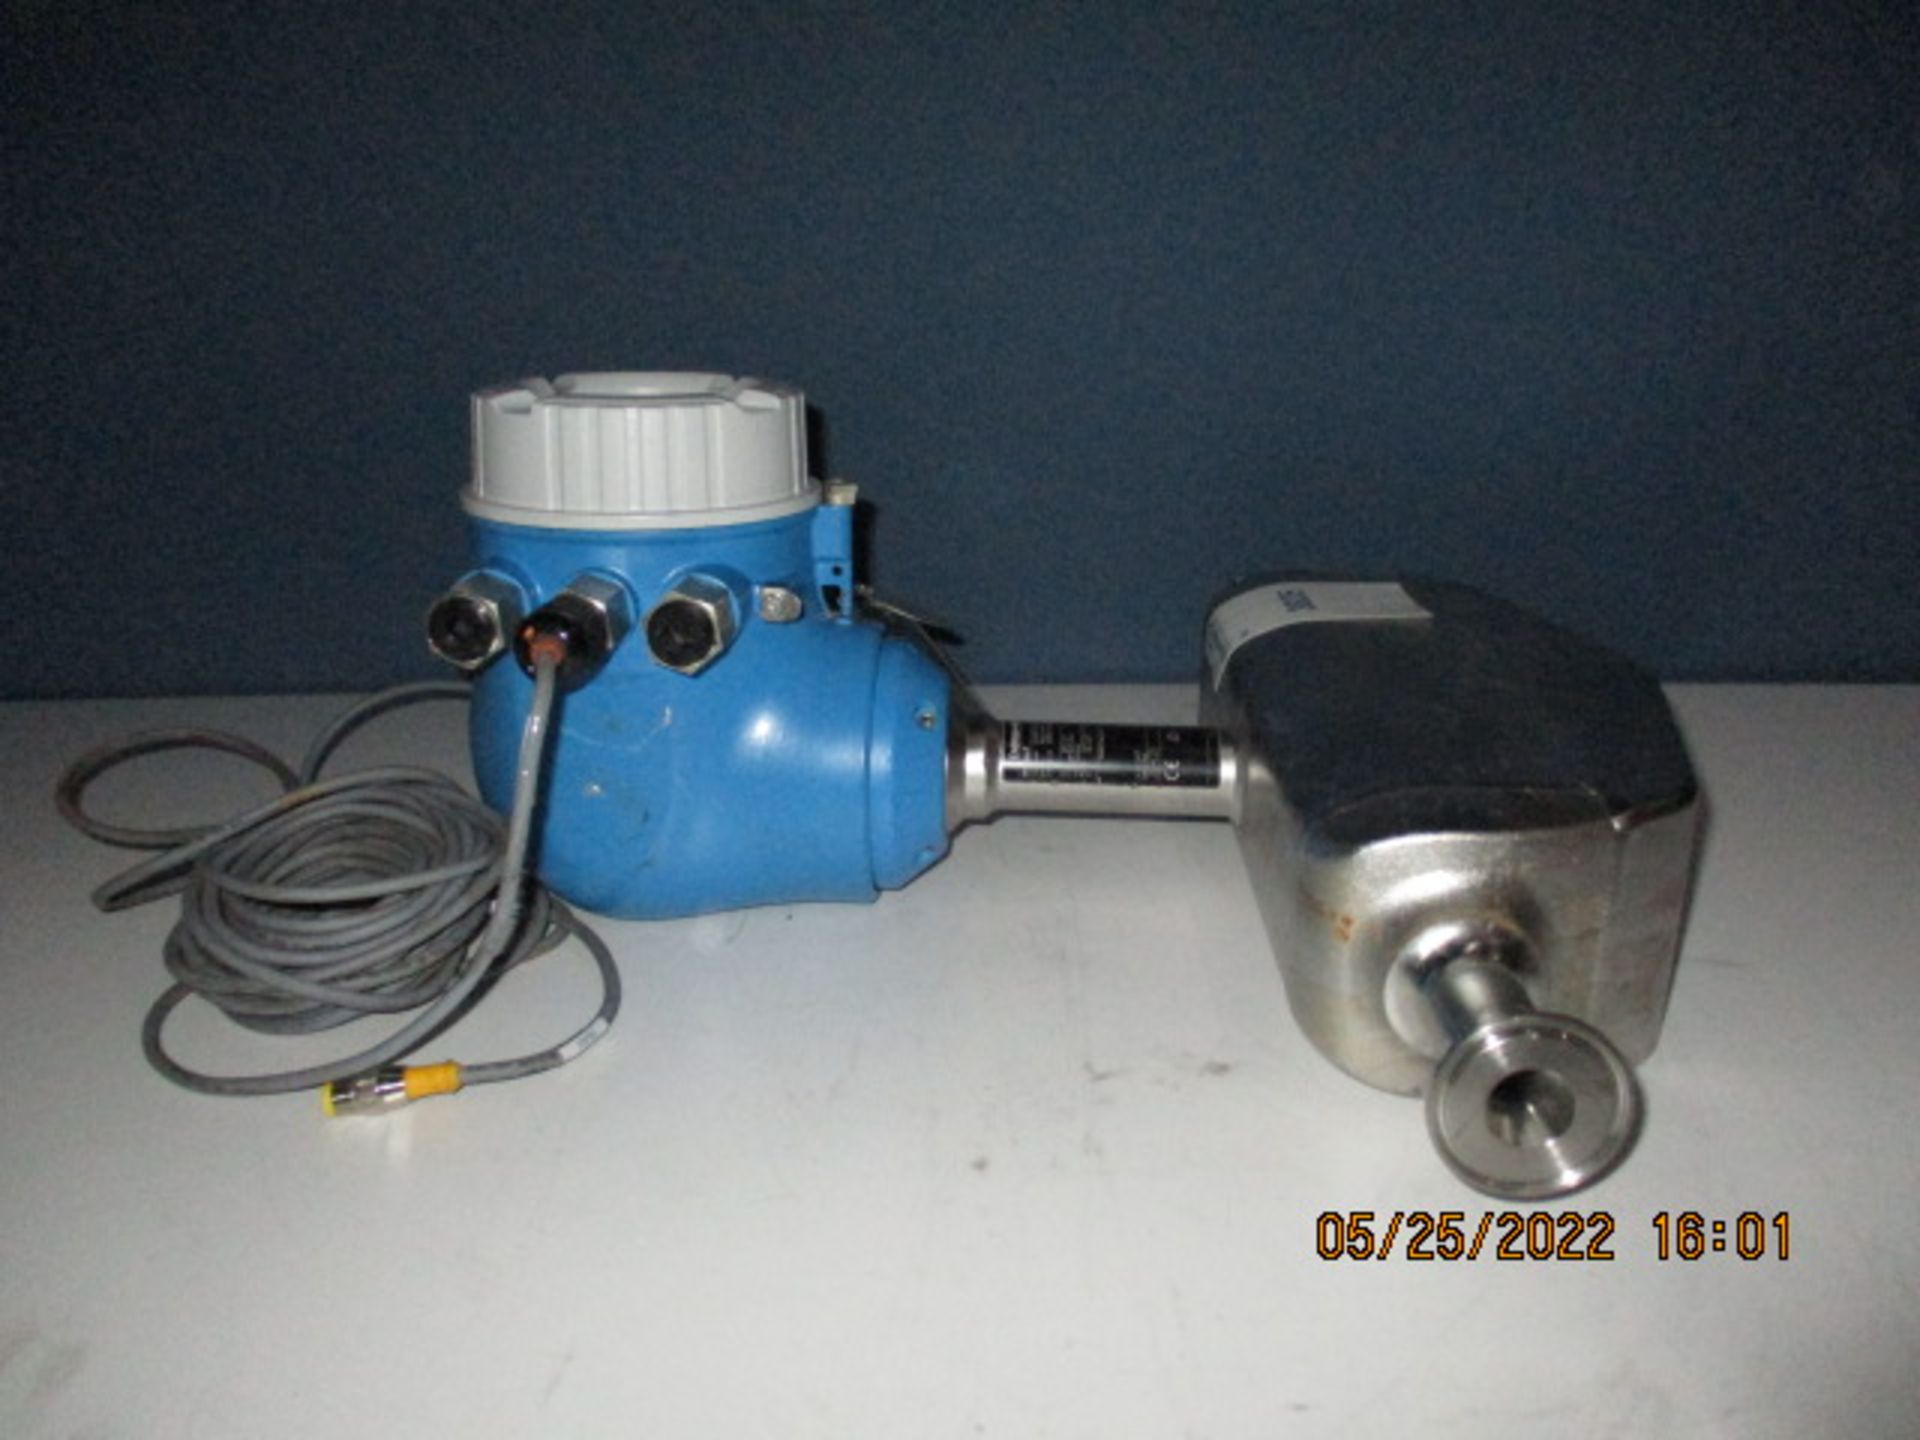 ENDRESS + HAUSER PROMASS 300 FLOW METER W PROMASS P SIZE DN15 / 1/2" - Image 2 of 7